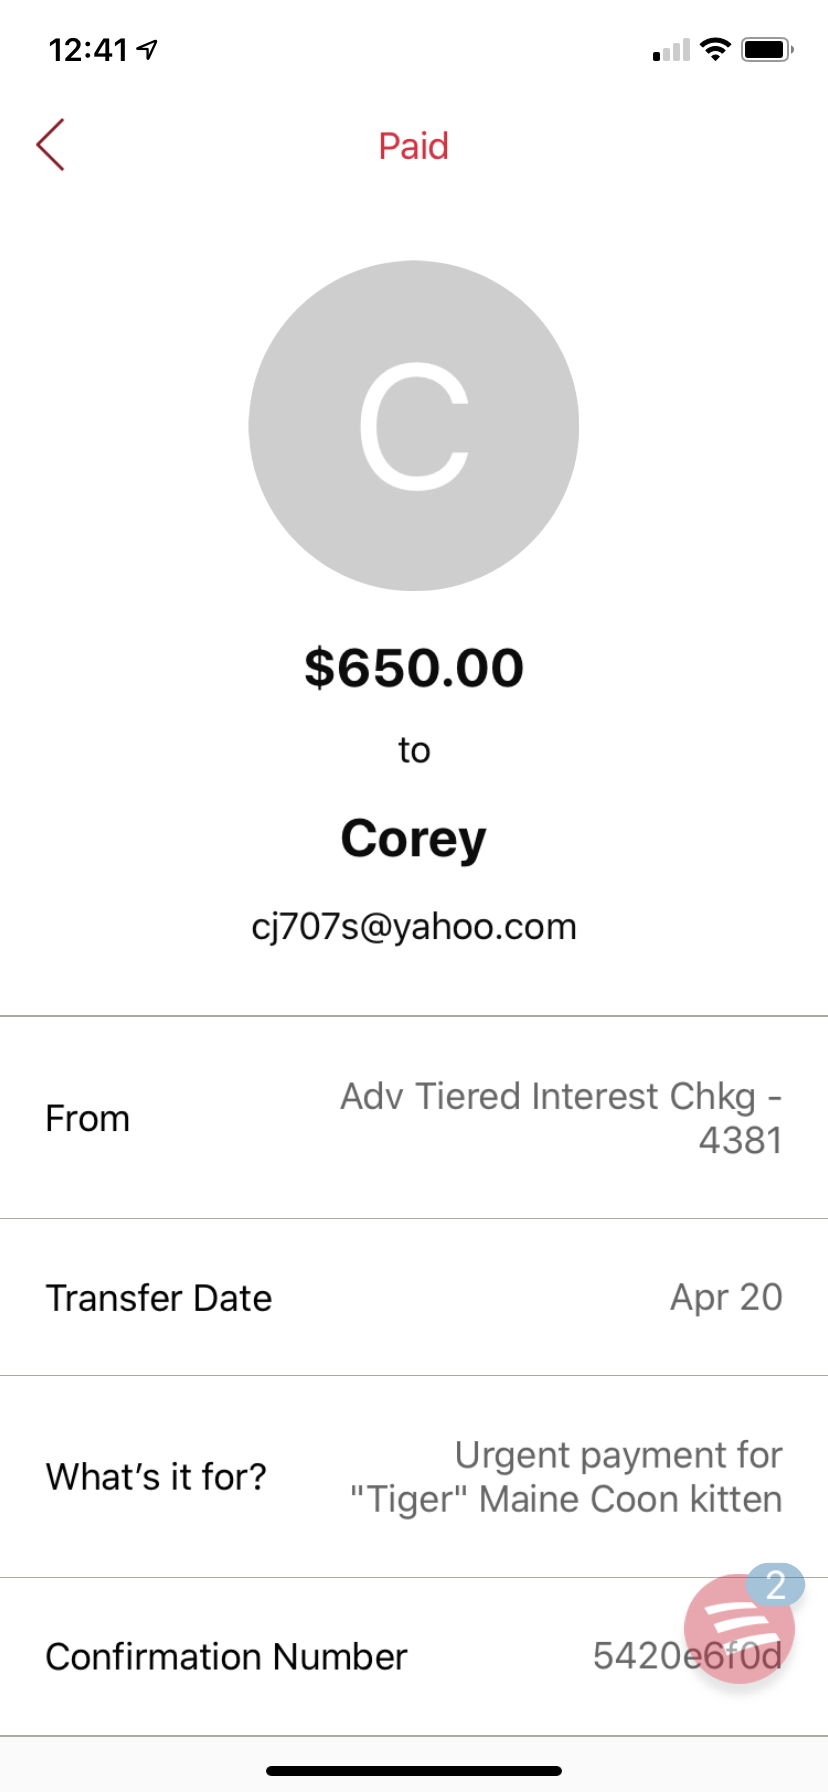 Proof of payment with his email